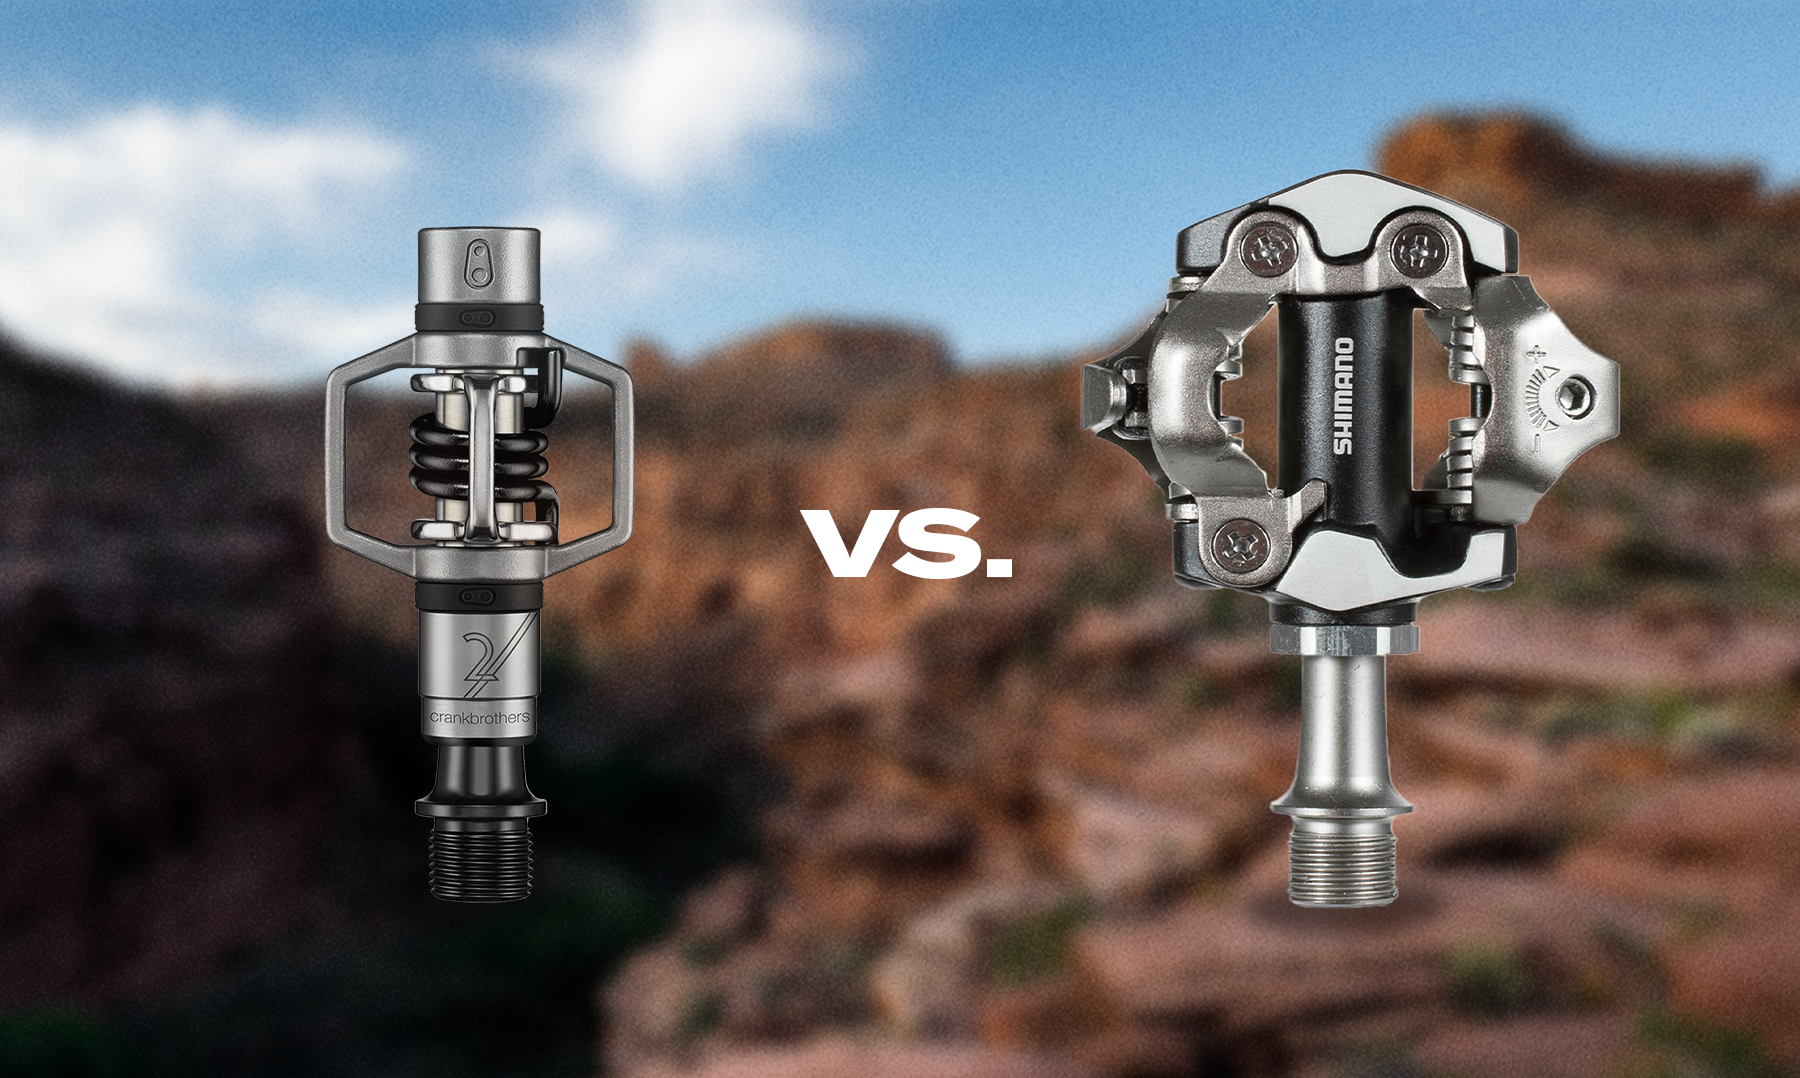 Crankbrothers vs. Shimano clipless mtb pedals